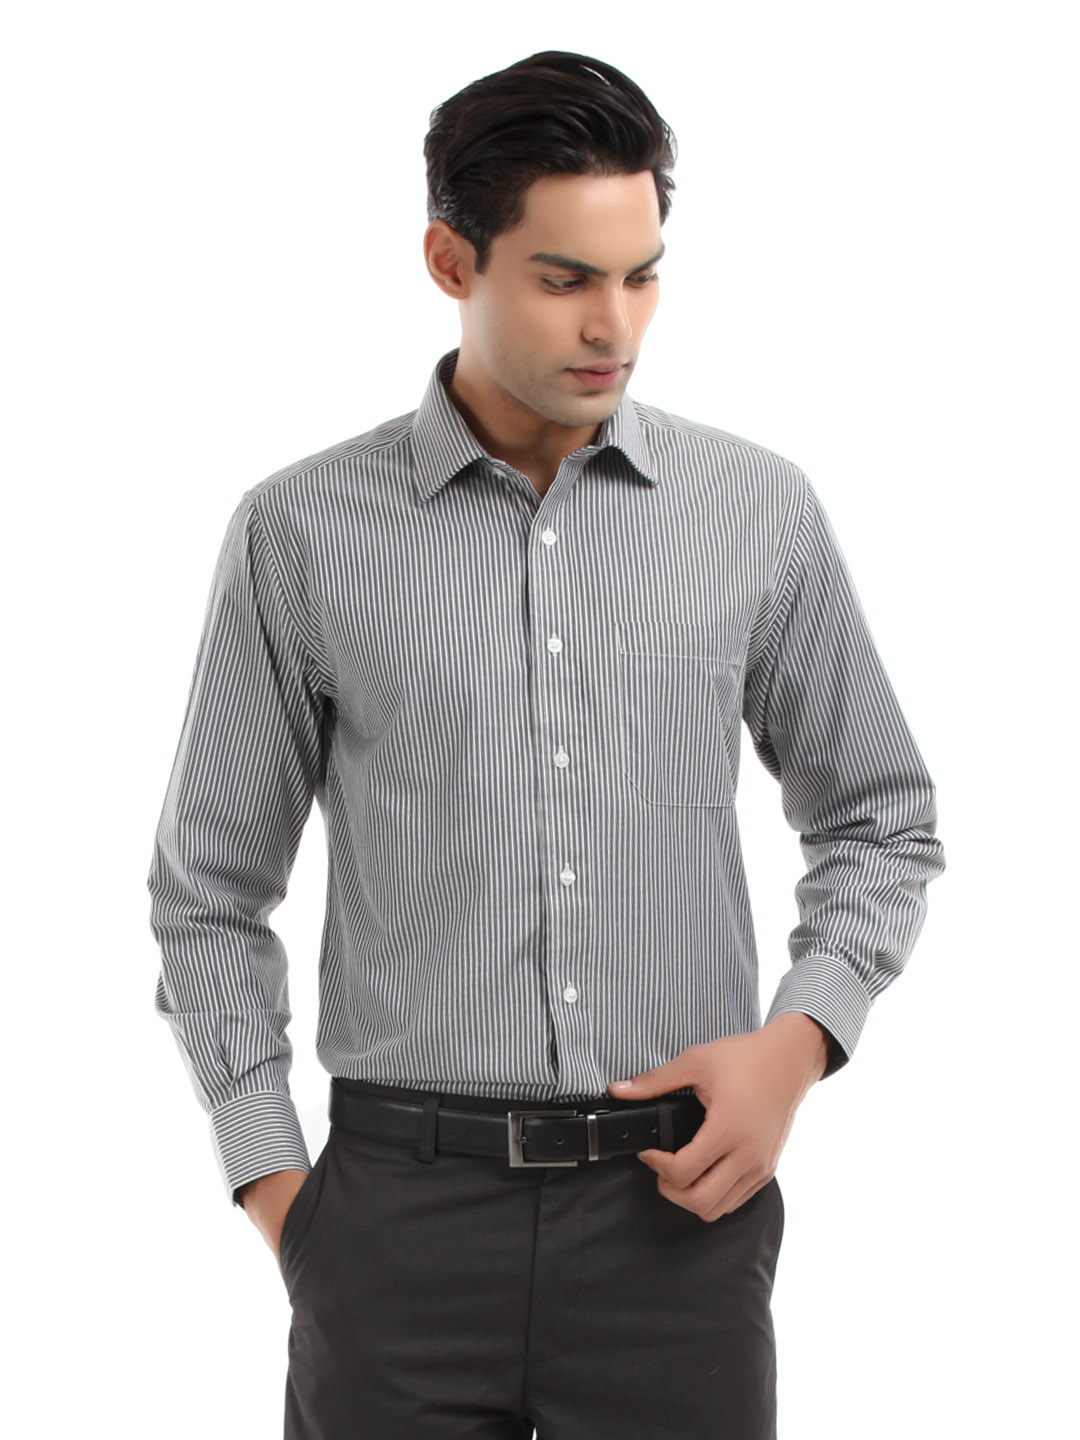 http://myntra.myntassets.com/images/style/properties/Peter-England-Men-Grey-and-White-Striped-Formal-Shirt_3ad64dae74514f6bf9884429dc39dd3f_images_1080_1440_mini.jpg